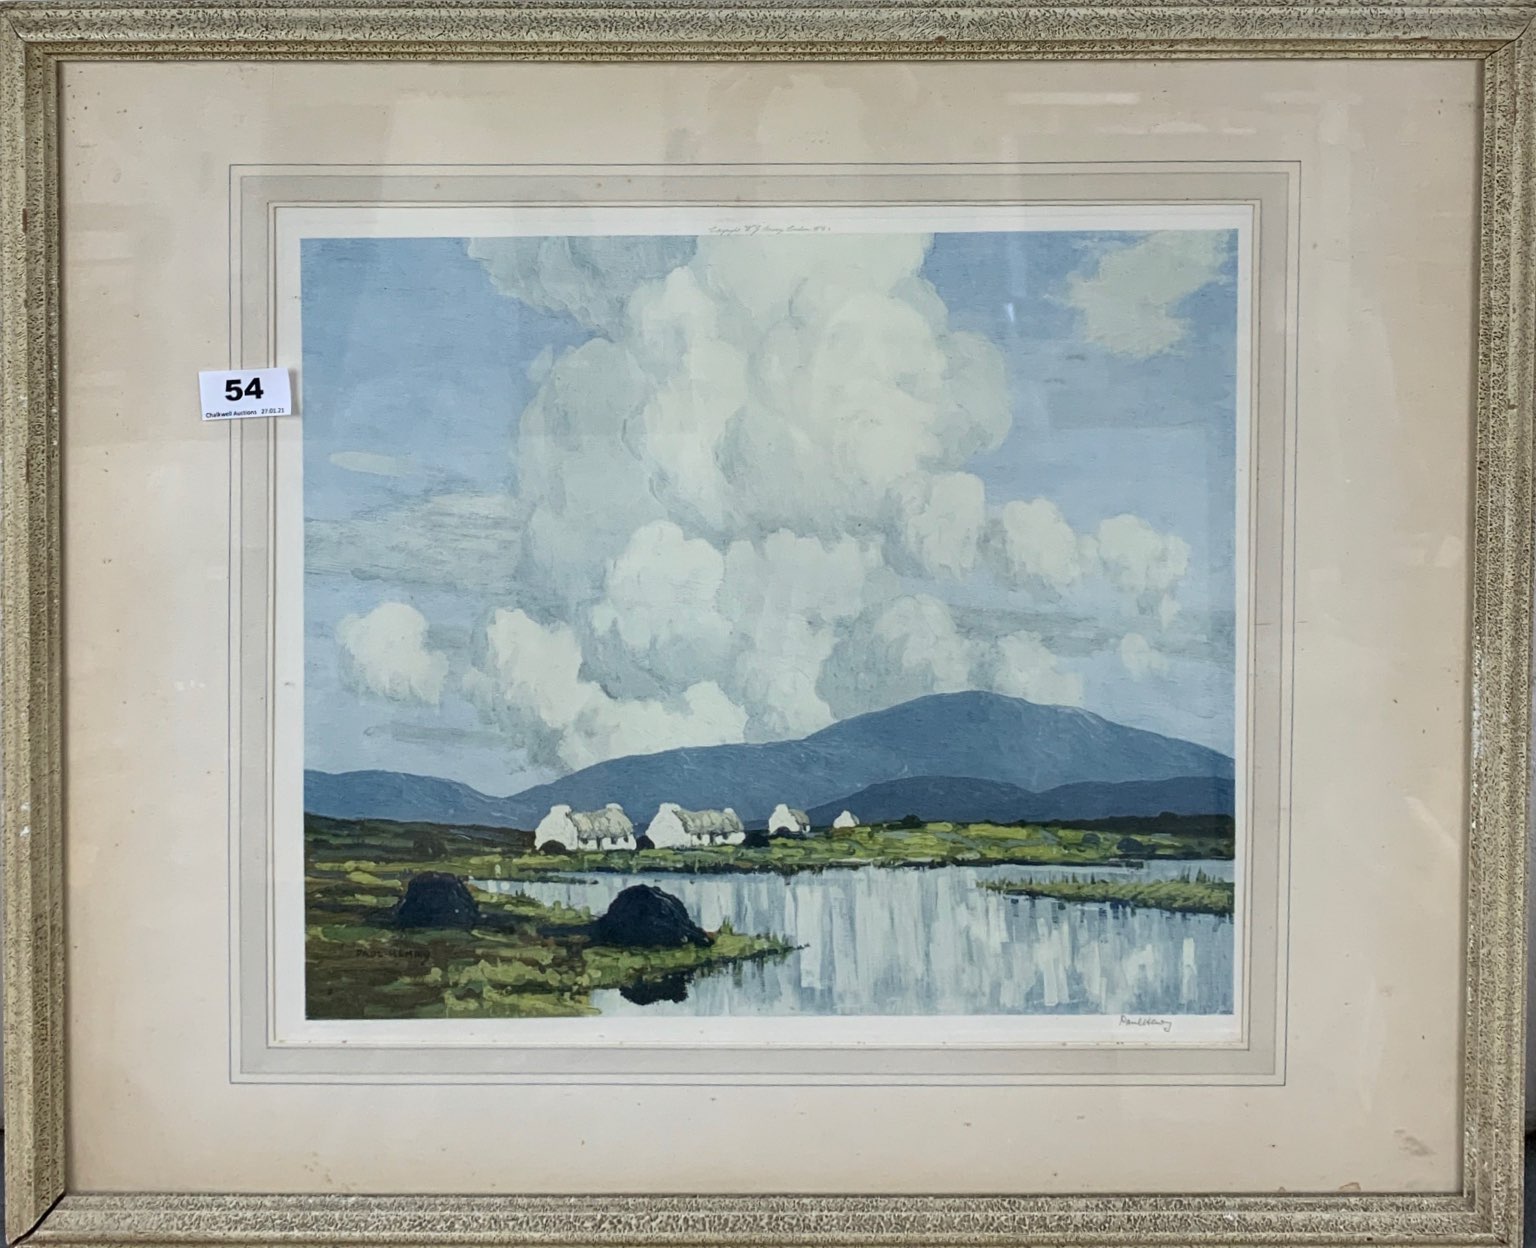 A Paul Henry framed pencil signed lithograph of a rural scene, 65cm x 55cm.